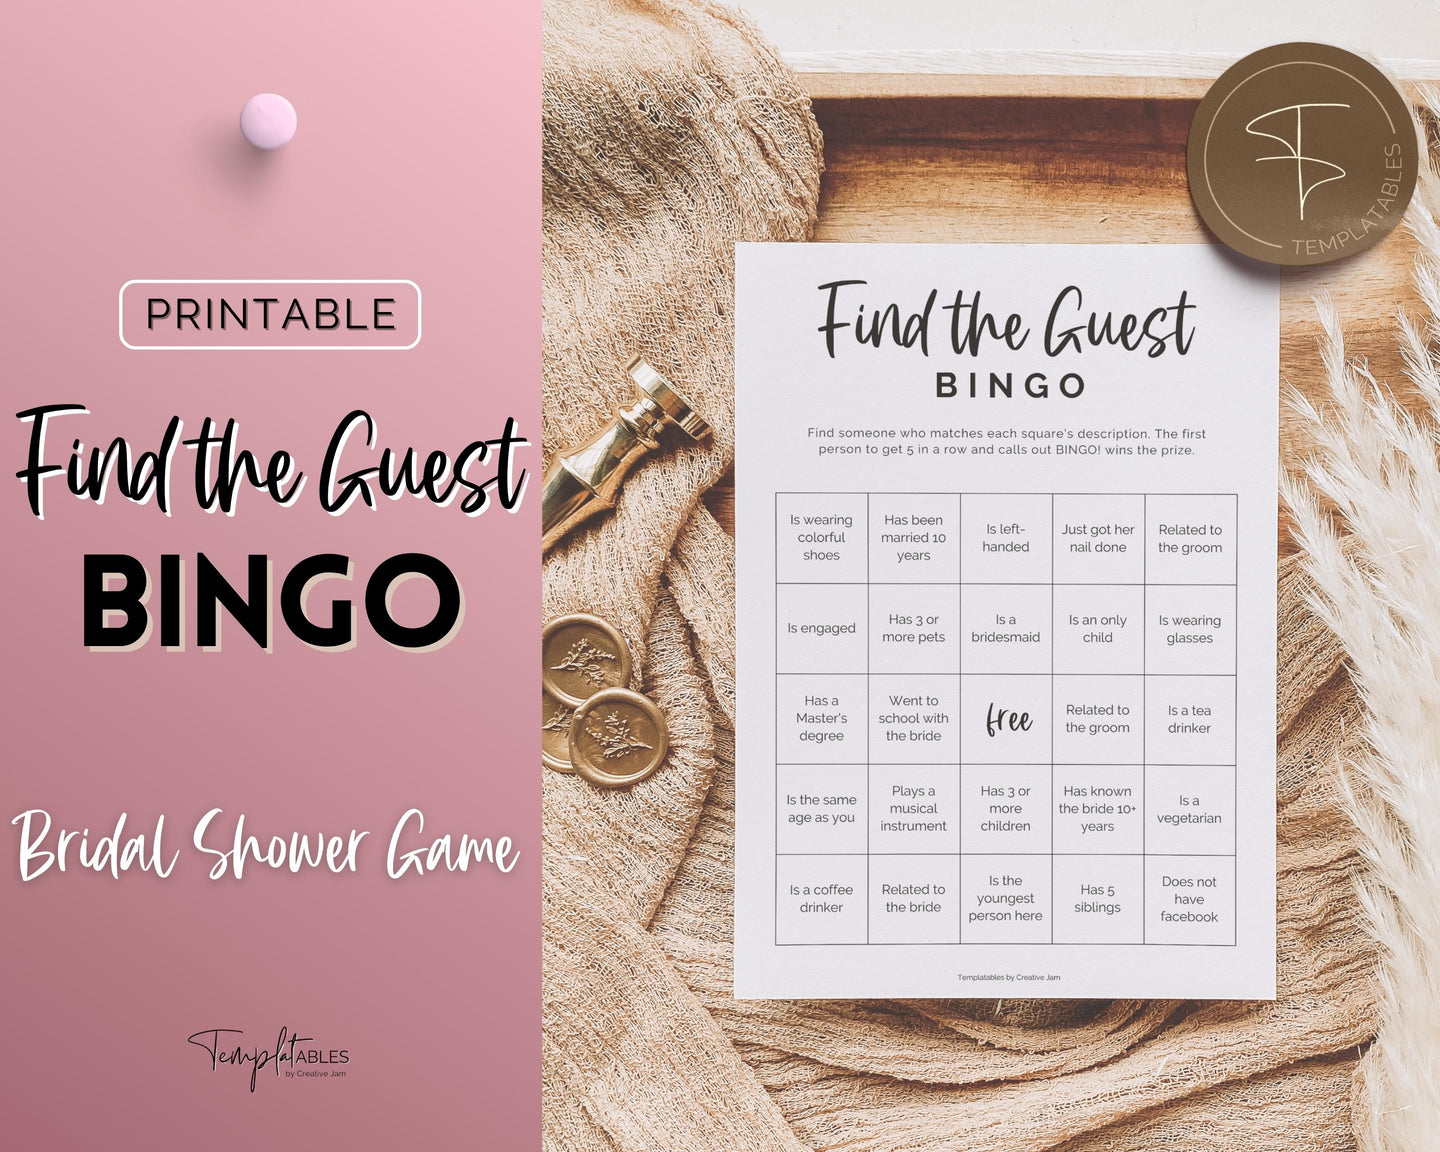 'Find the Guest Bingo' Bridal Shower Game Printable